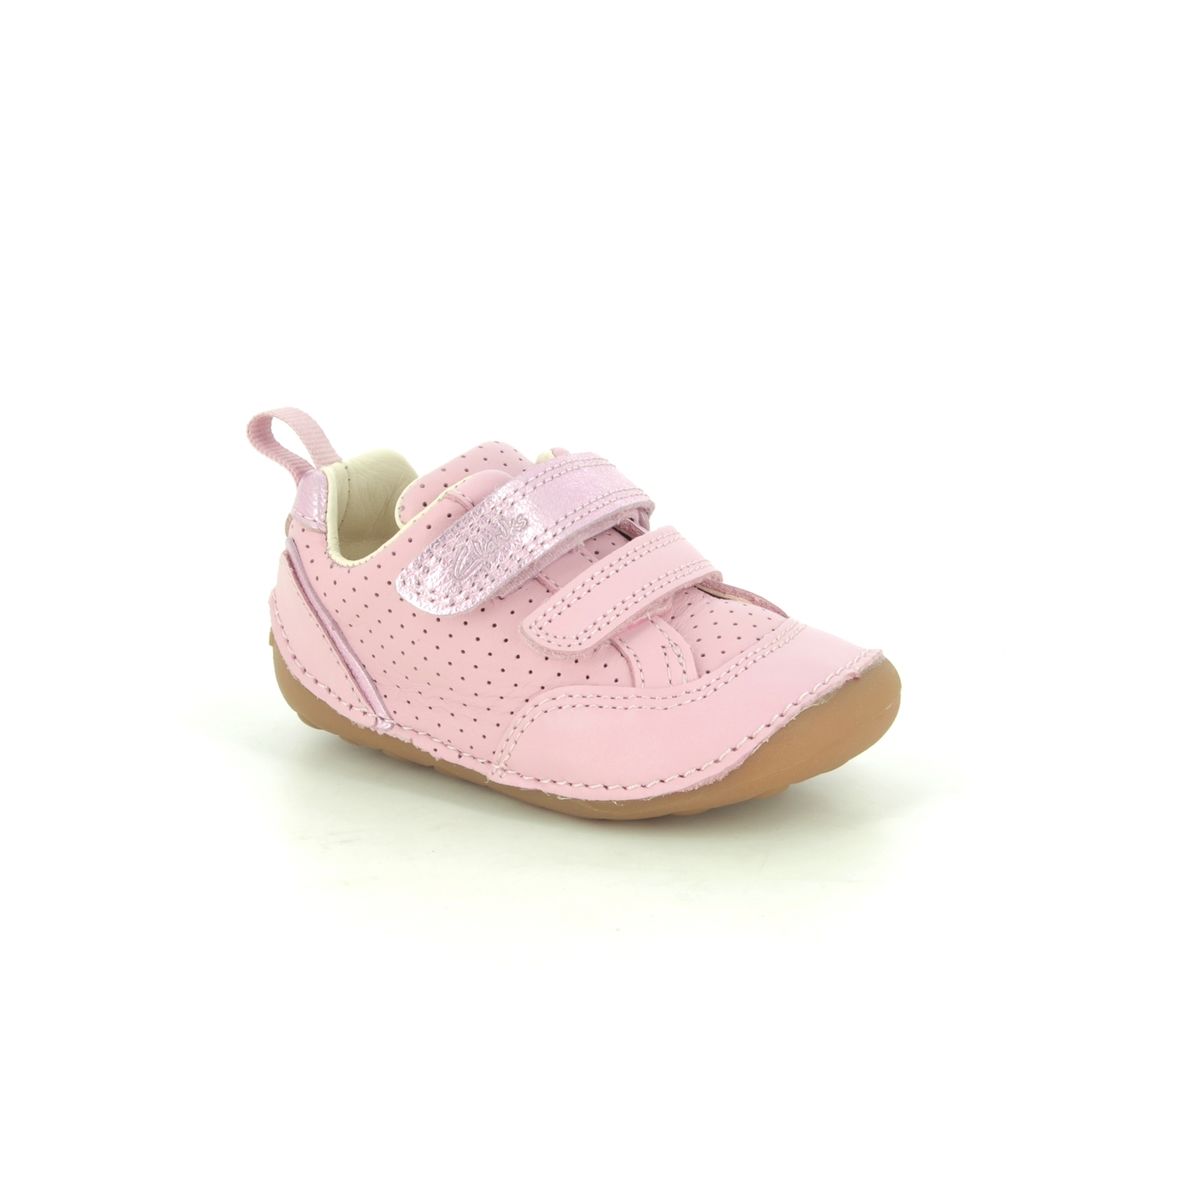 Clarks Tiny Sky T Pink Leather Kids Girls First And Baby Shoes 576286F In Size 2 In Plain Pink Leather F Width Fitting Regular Fit For kids